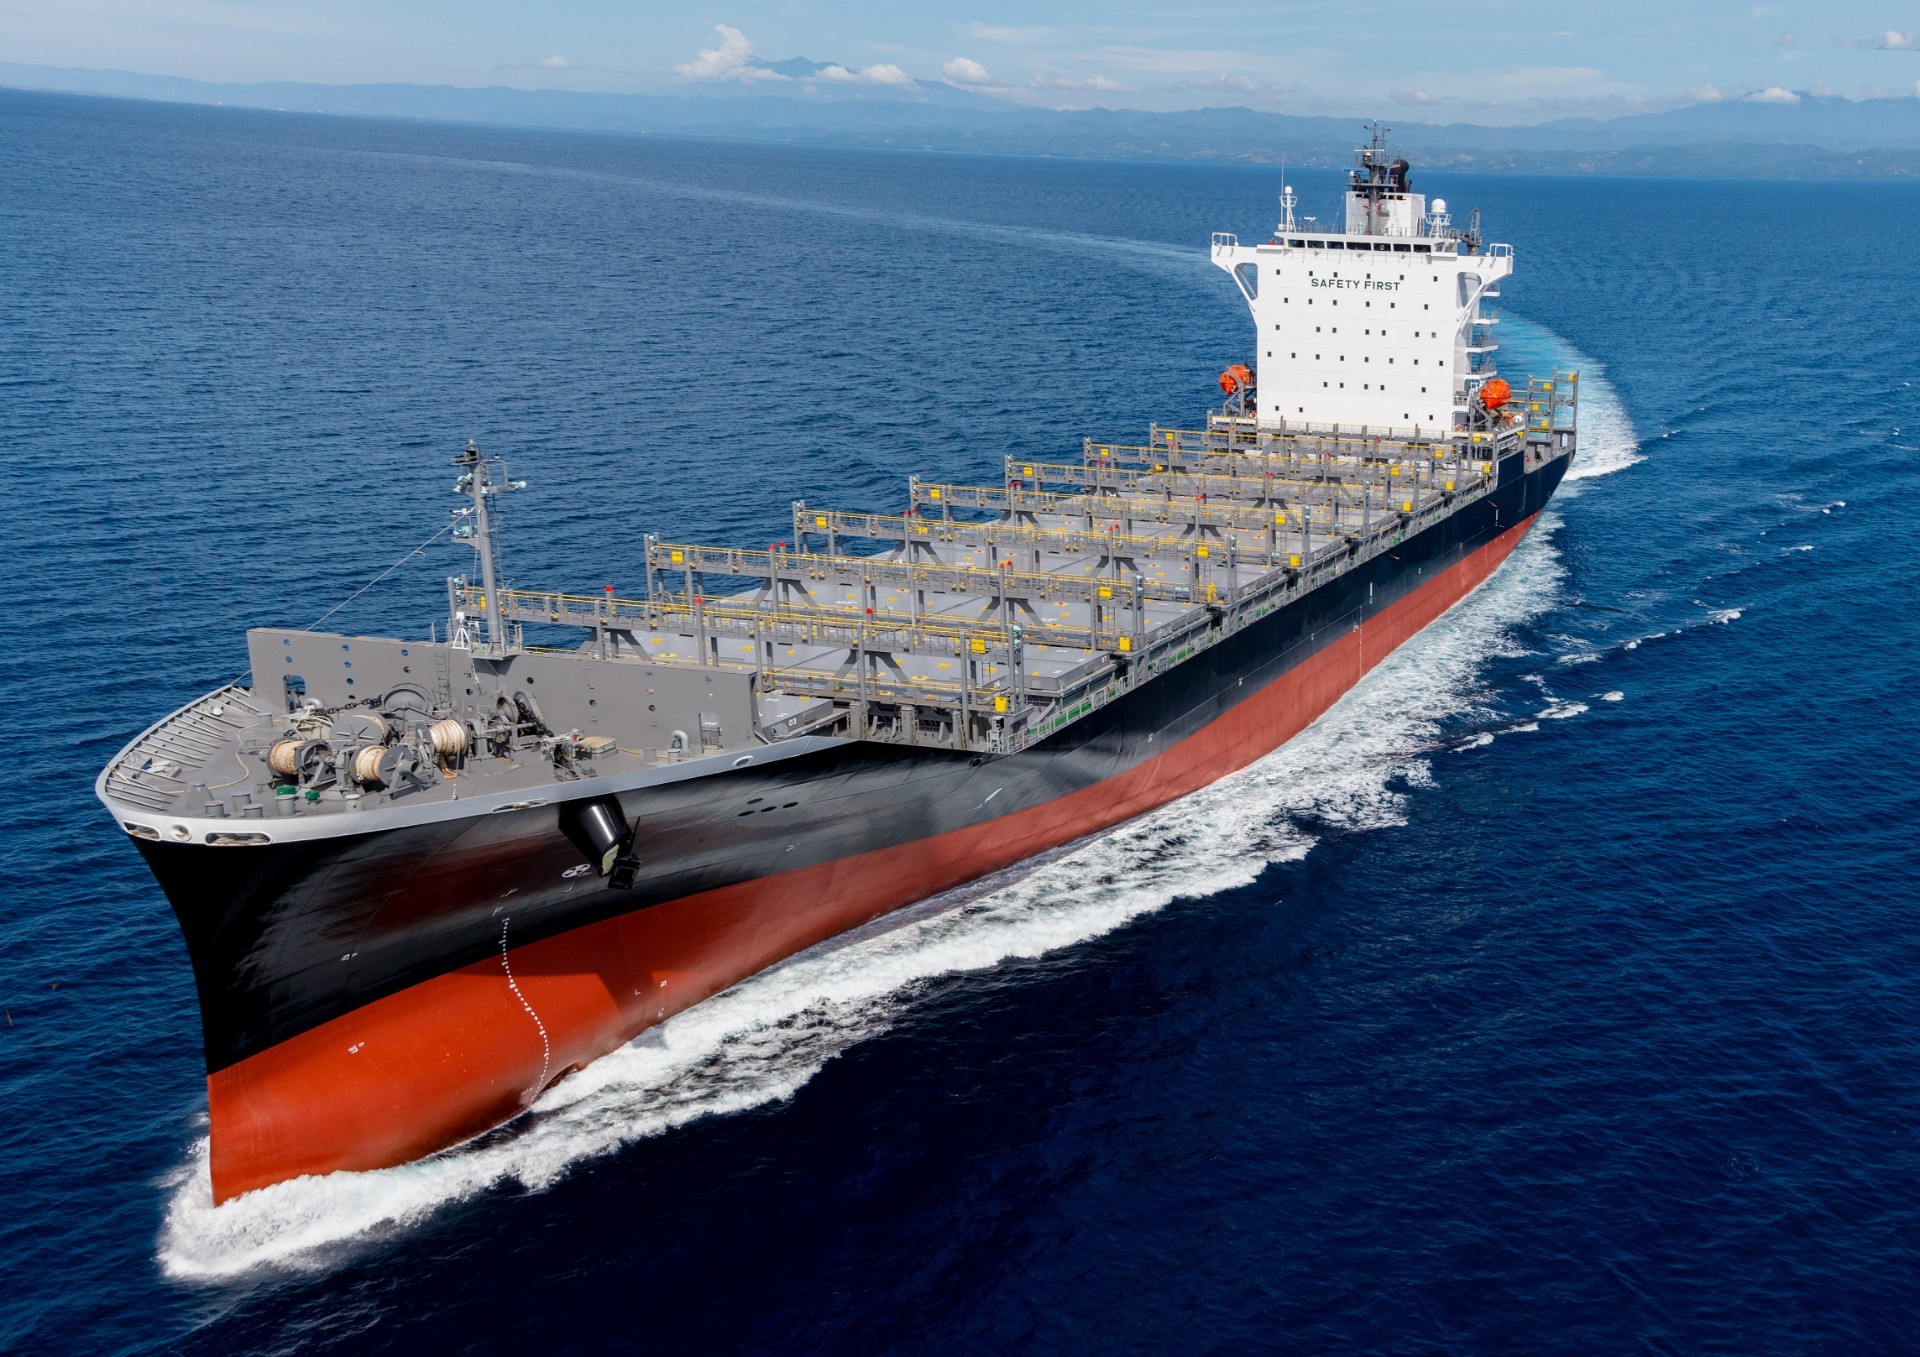 TSUNEISHI SHIPBUILDING Delivers its First 1,900 TEU Container Carrier at its Philippines Site: One of the largest container load capacity as a Bangkok Max